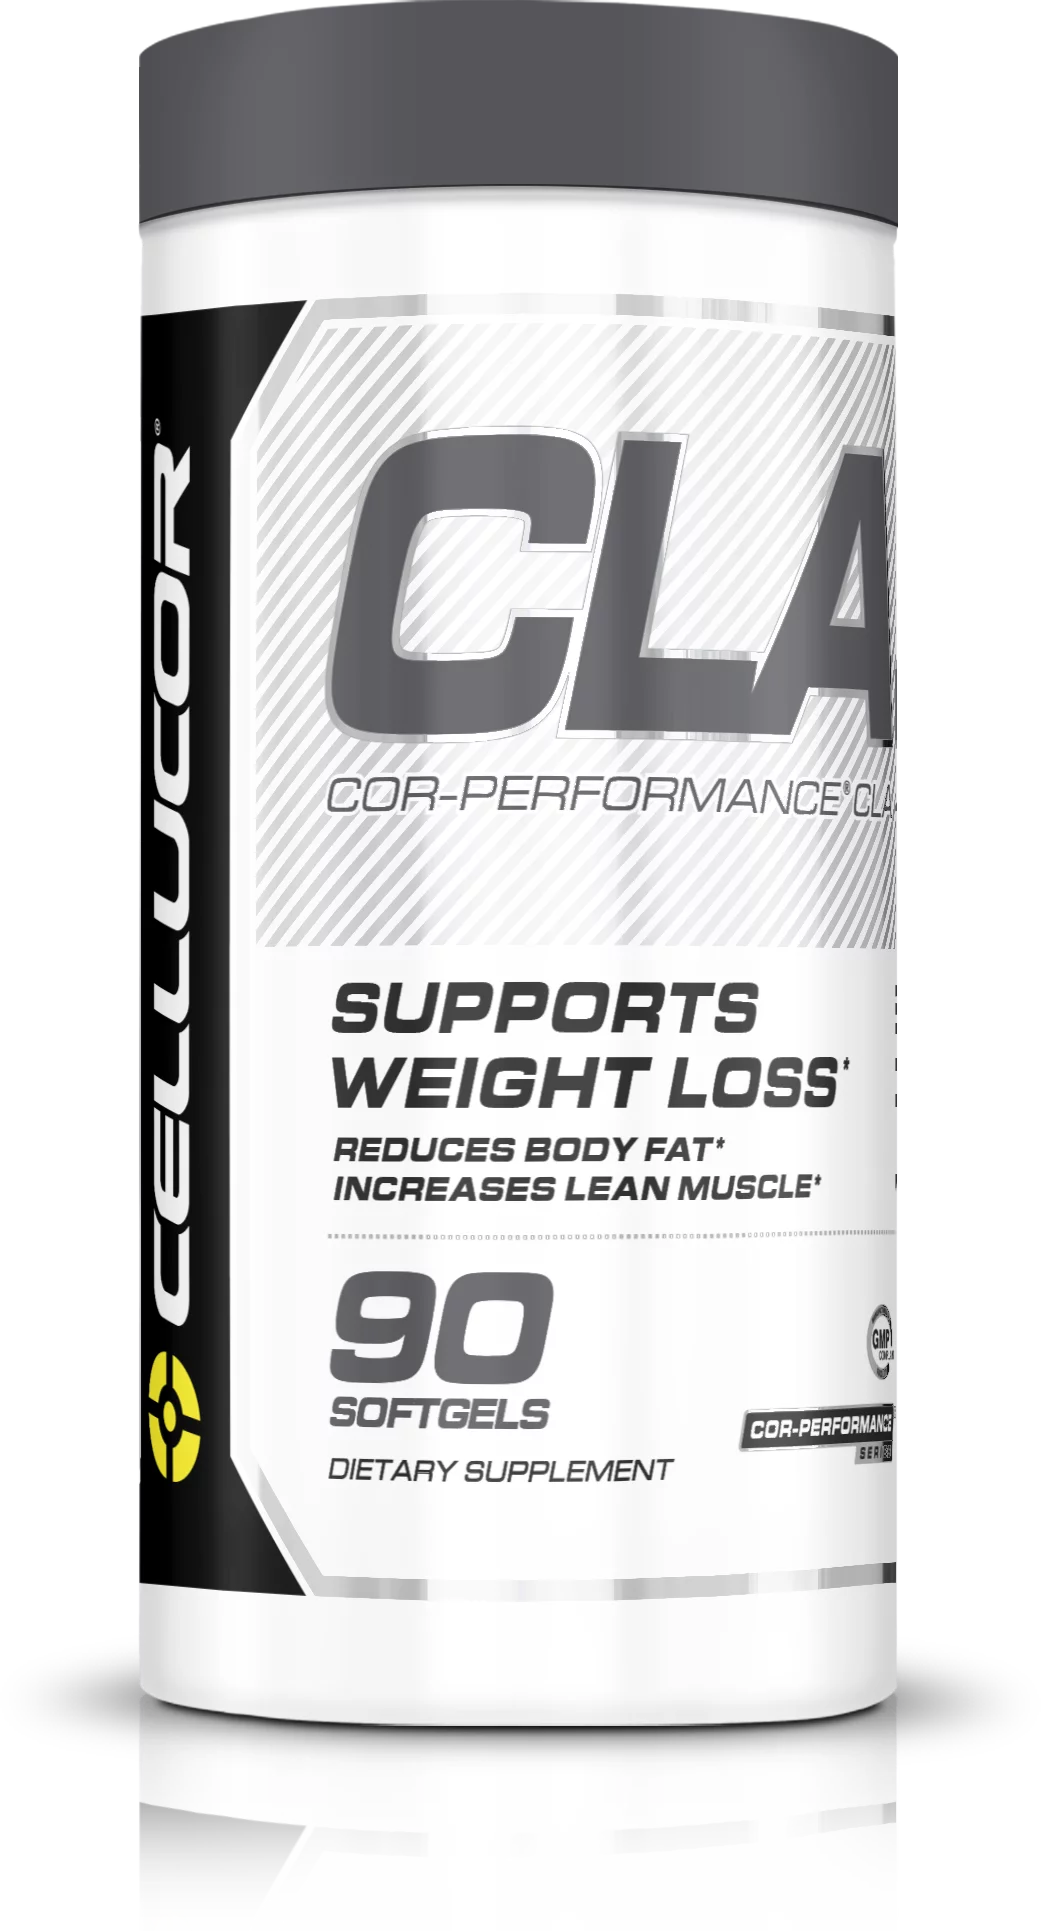 CLA supports weight loss 90 softgels